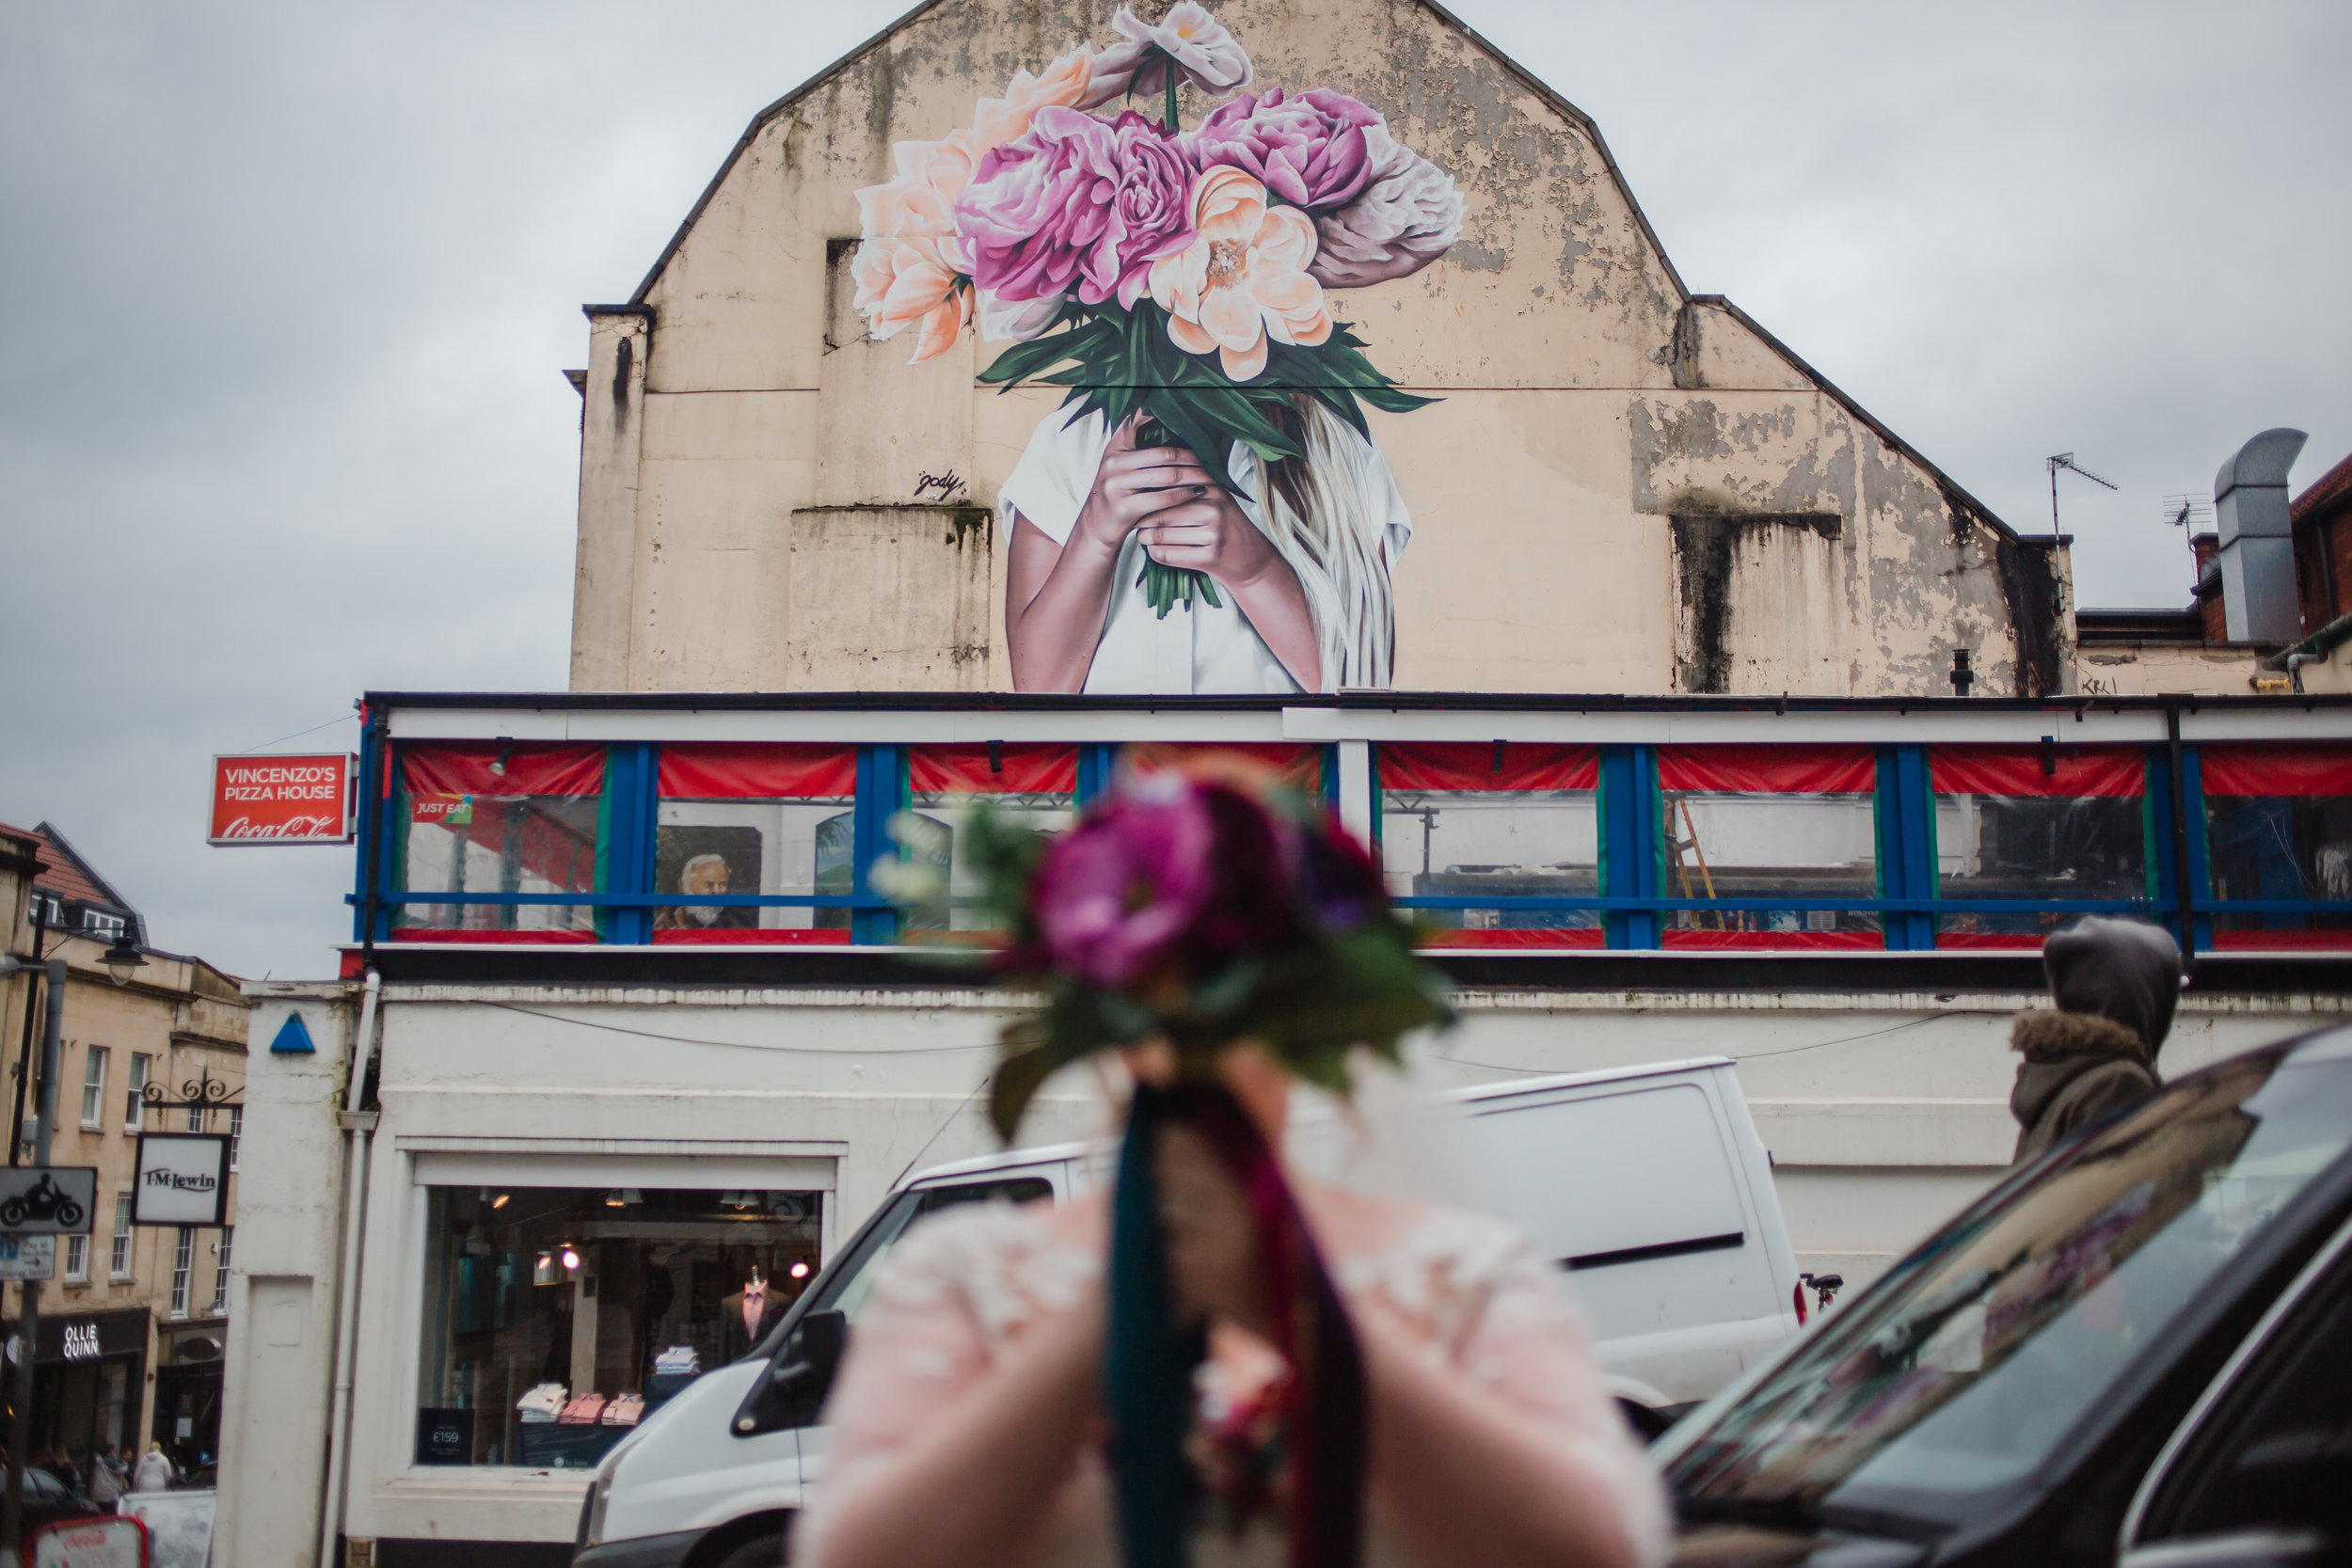 two brides and flowers - street art in bristol